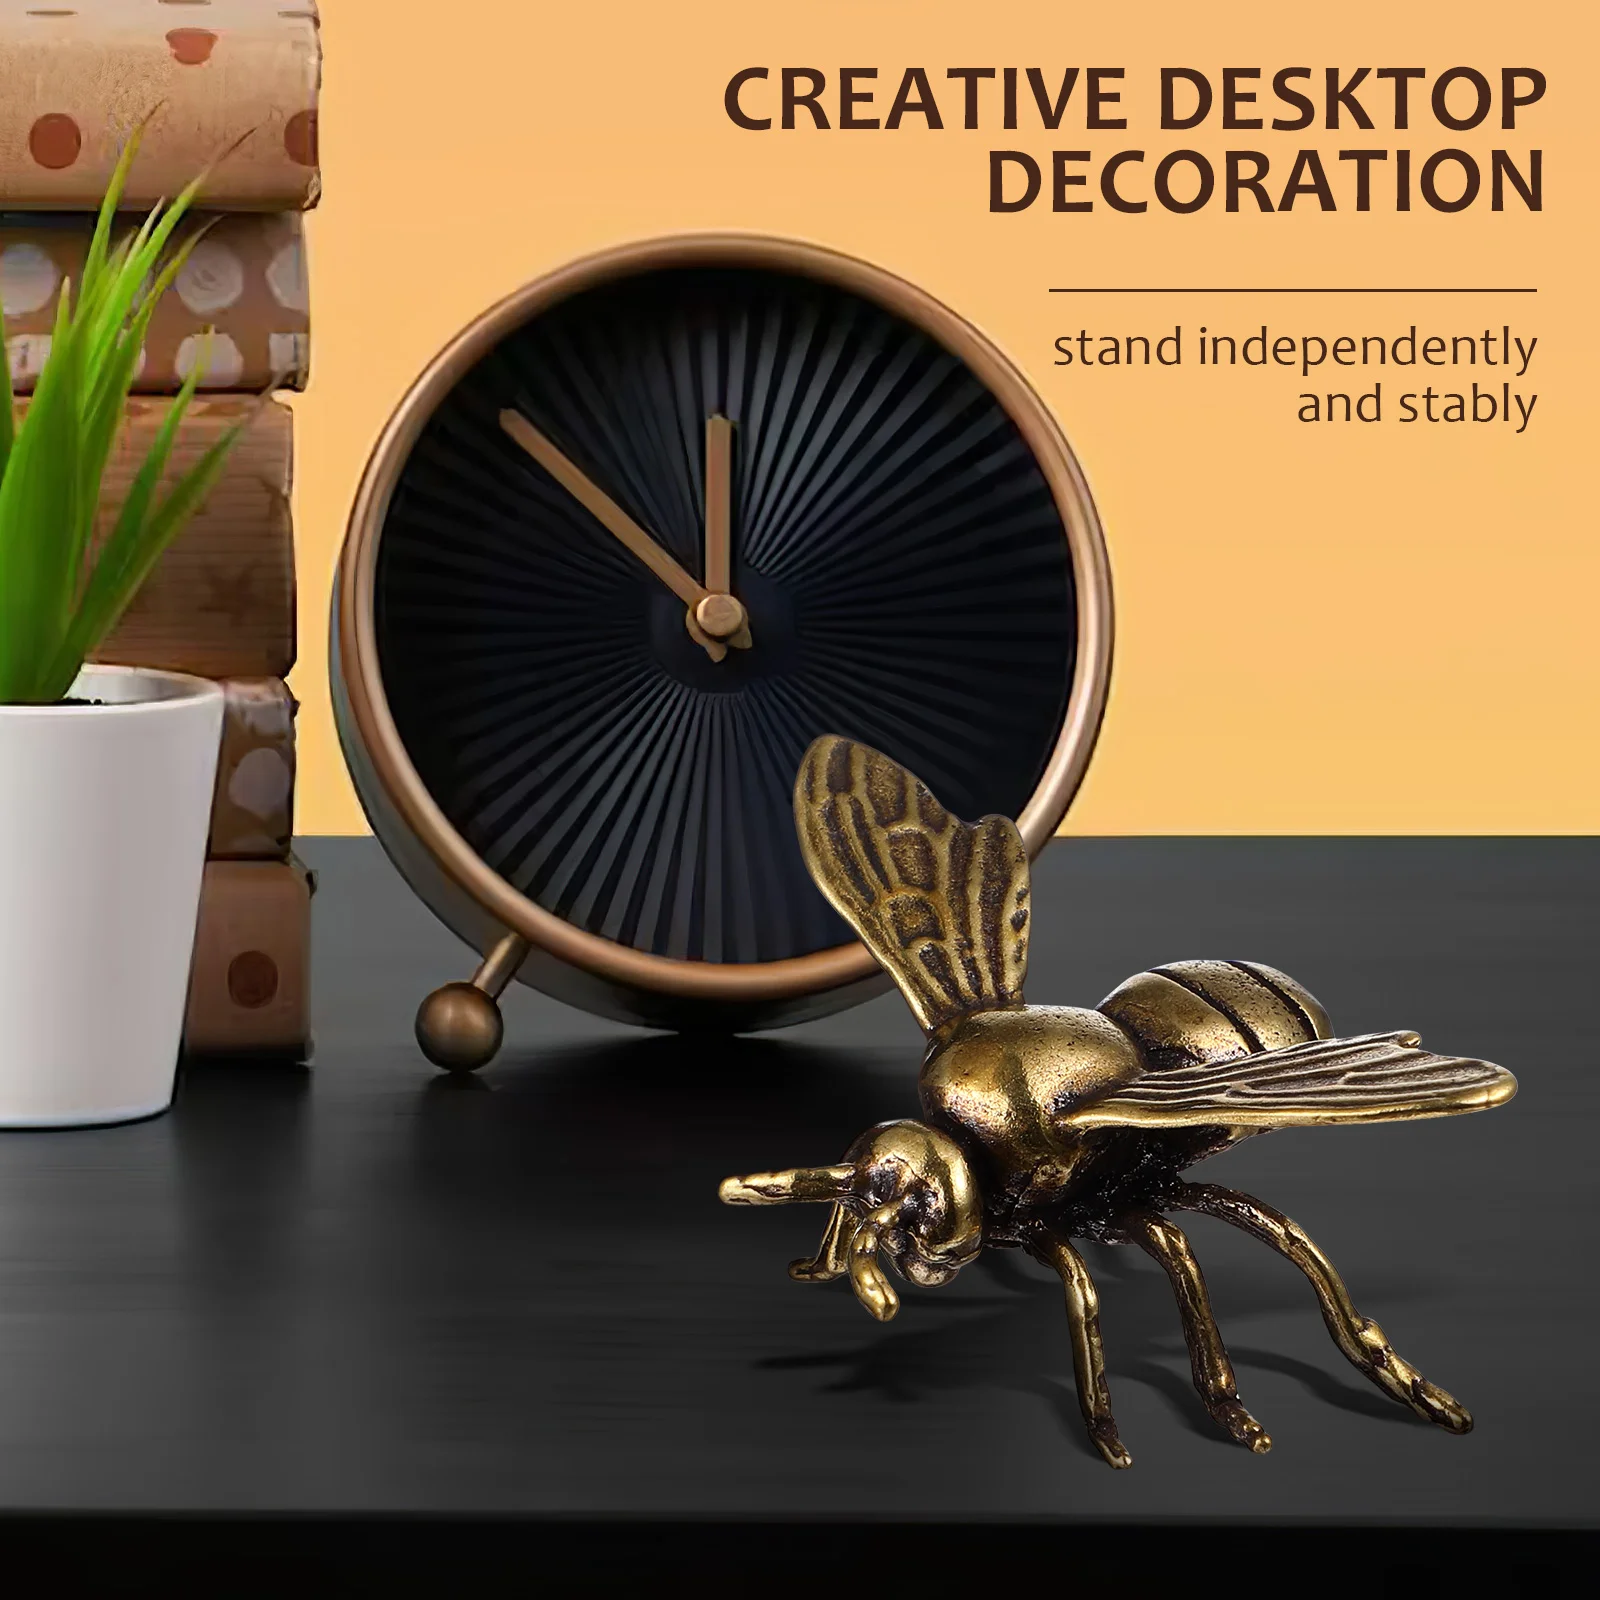 

Bee Handmade Pure Copper Antique Bronze Ware Study Office Decoration Handicrafts Collectible Ornaments Gifts Decor Home